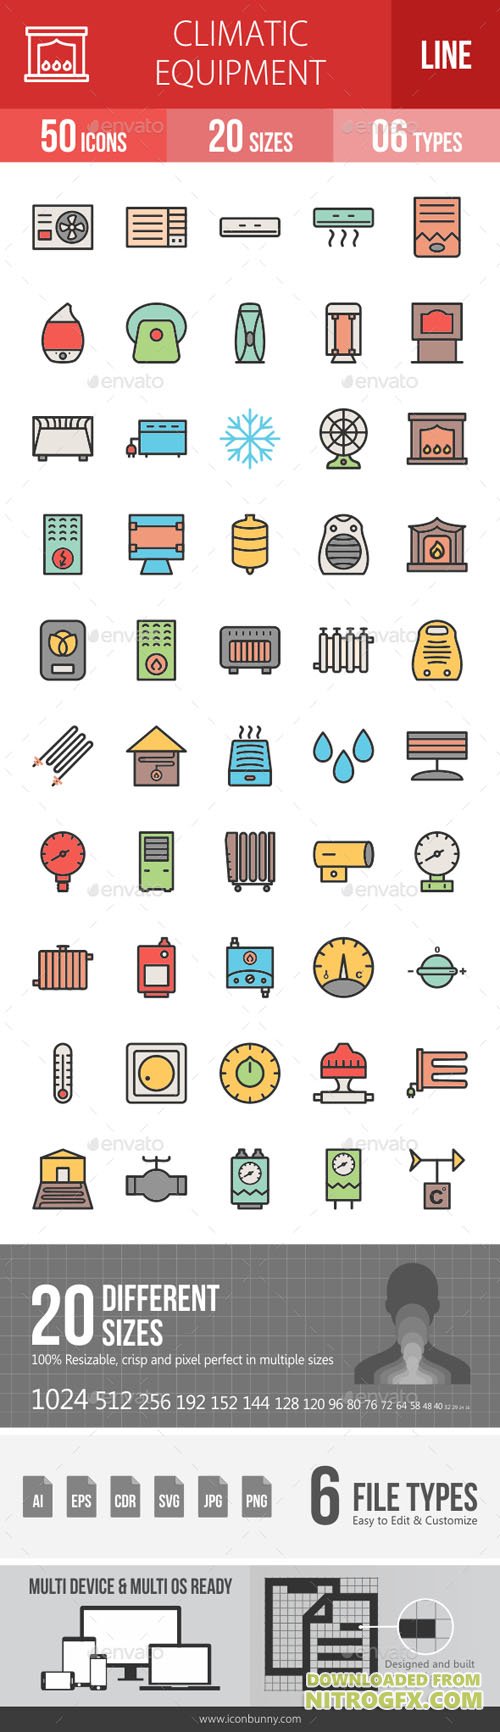 Climatic Equipment Line Filled Icons 19267752